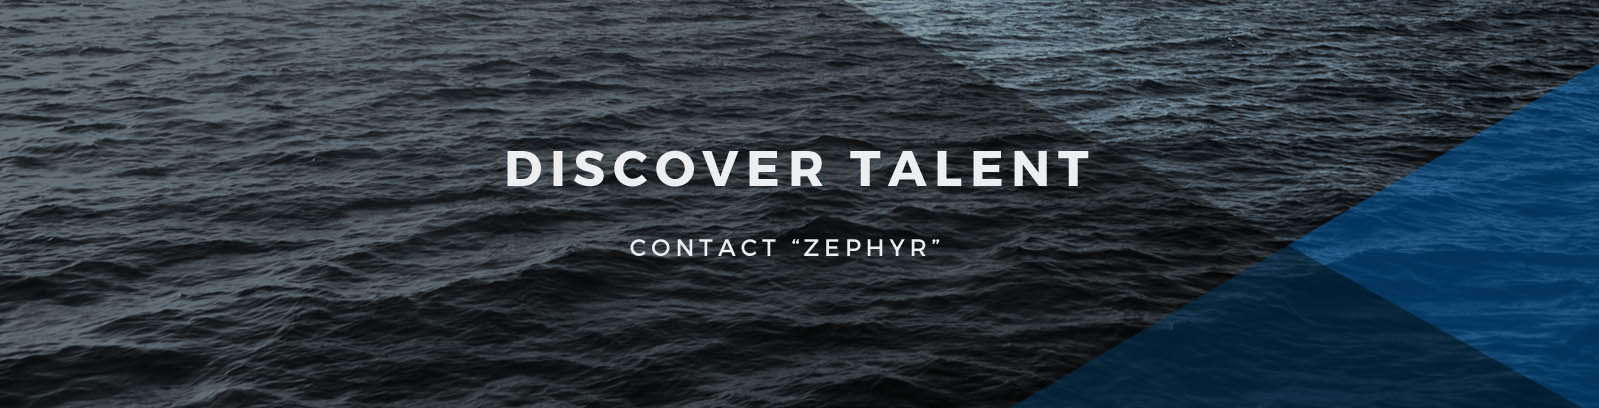 Discover Talent